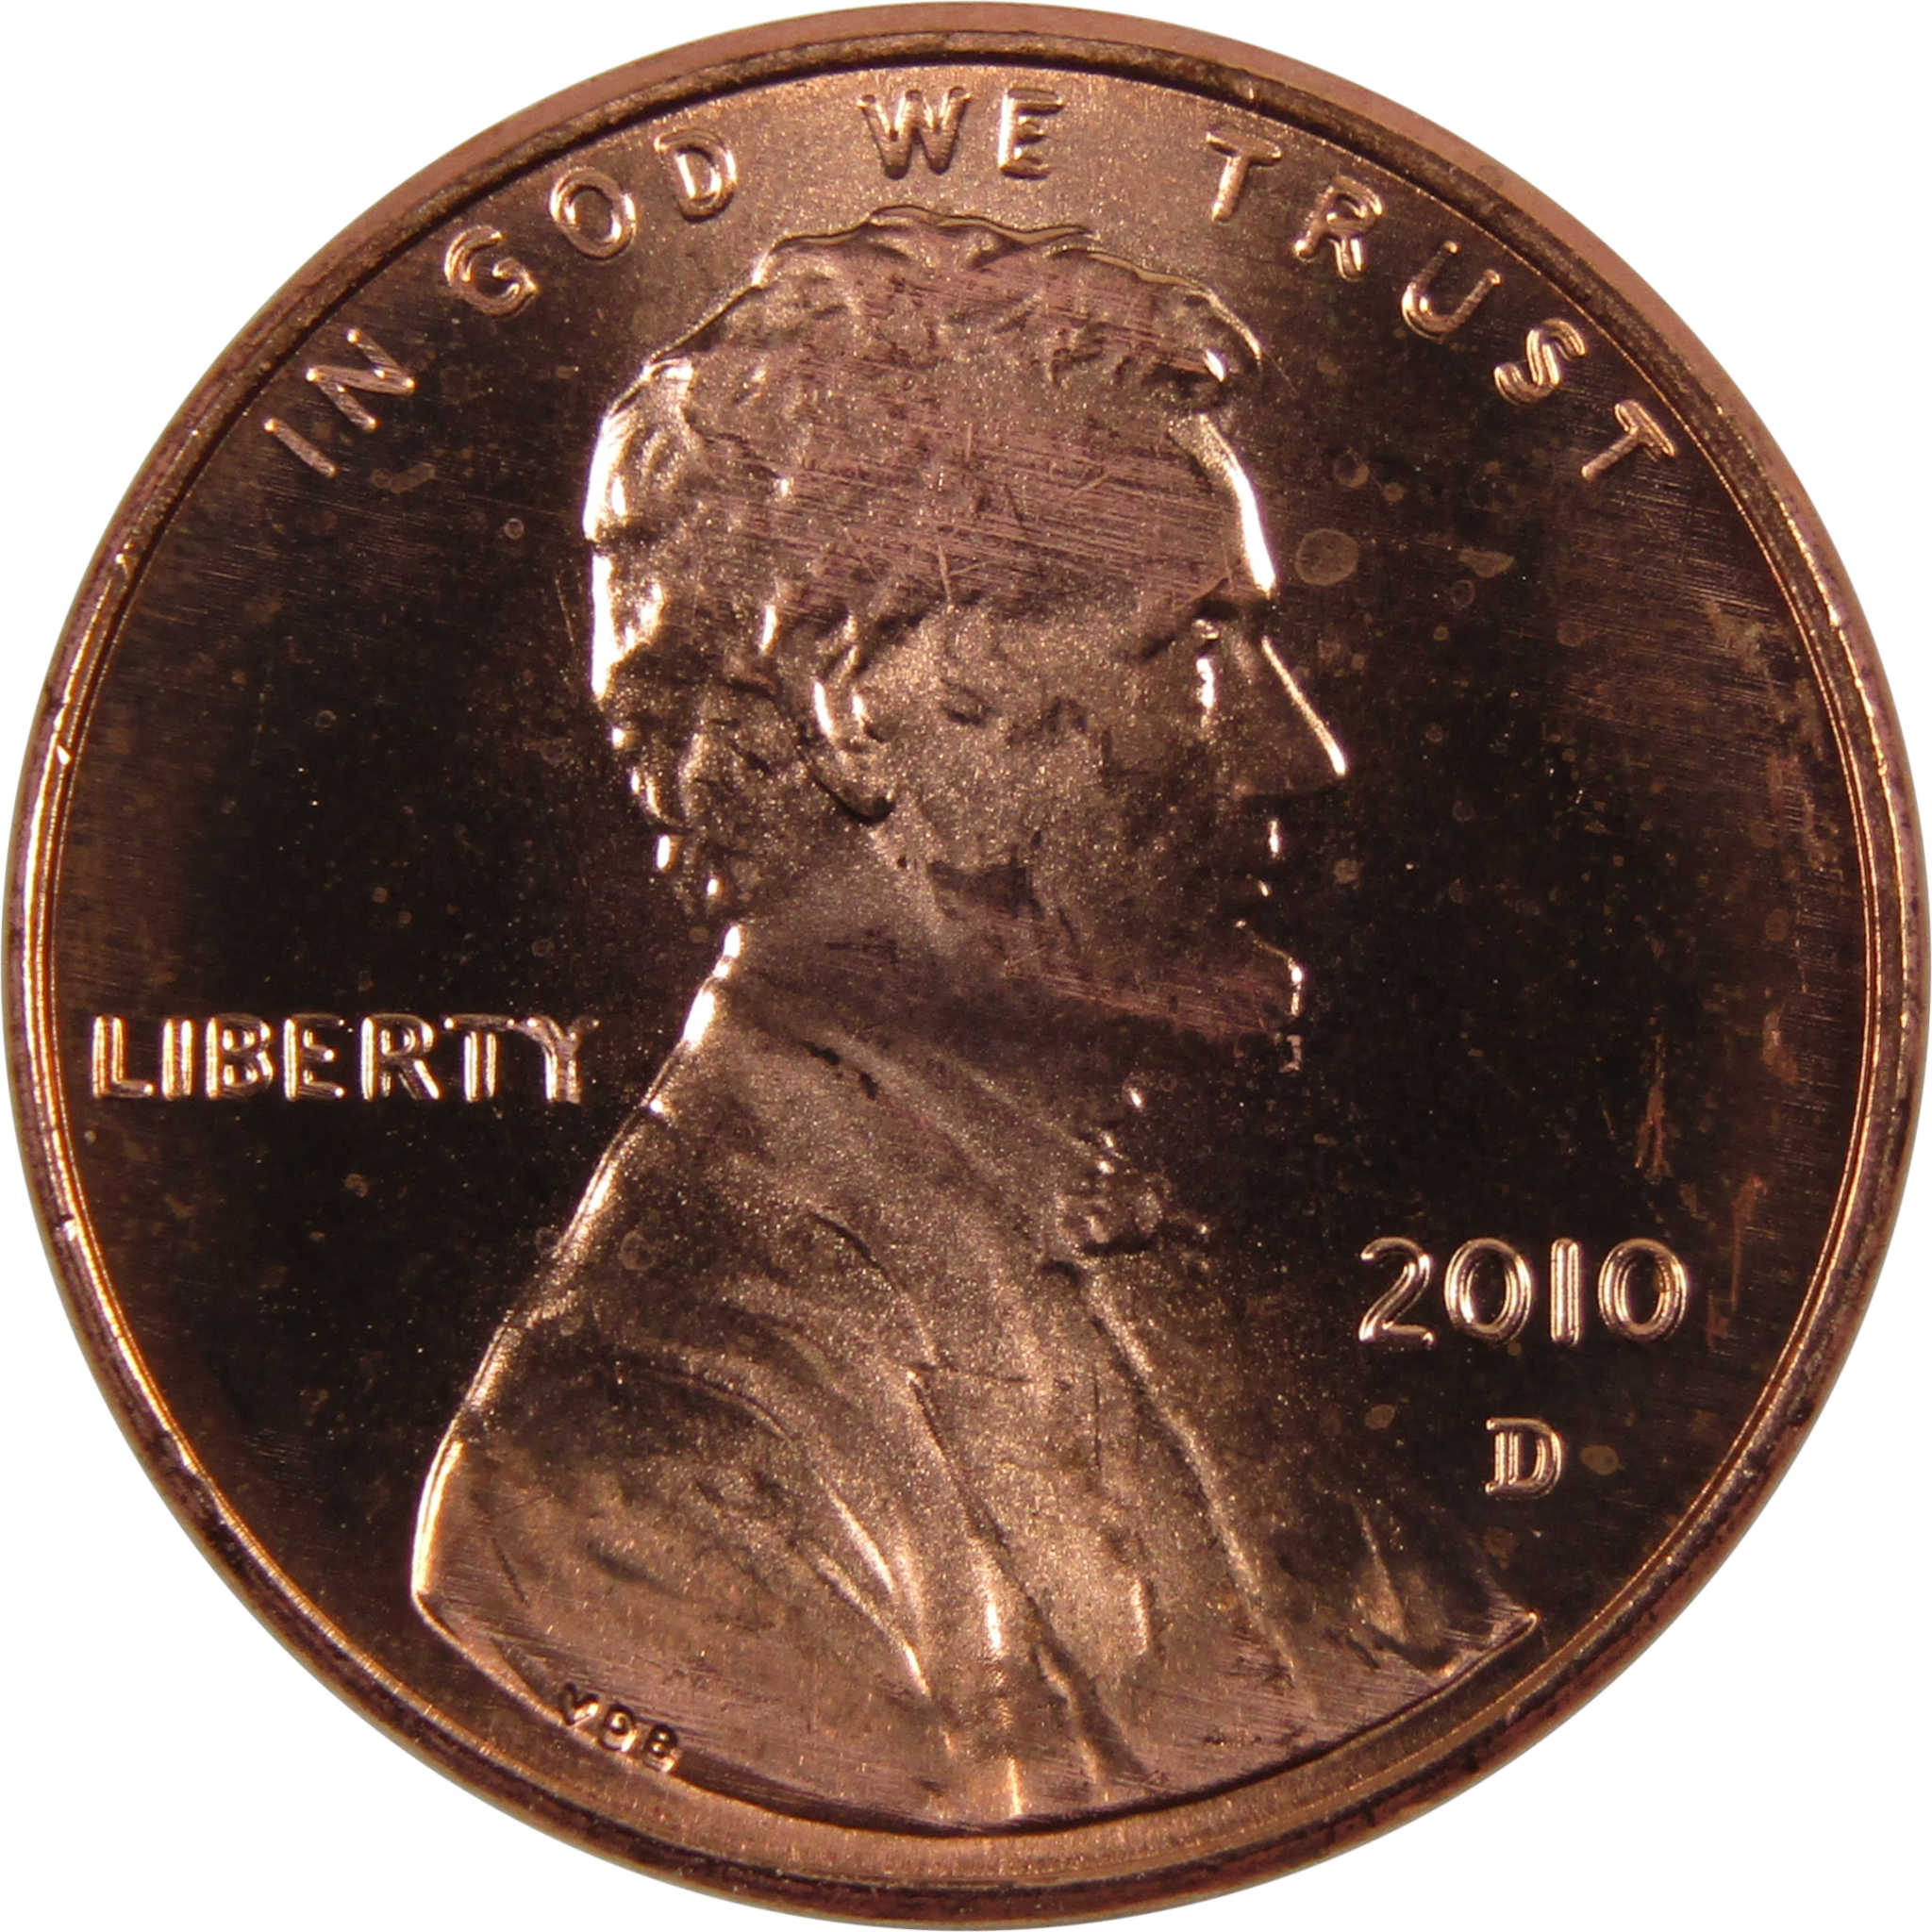 2010 D Lincoln Shield Cent BU Uncirculated Penny 1c Coin